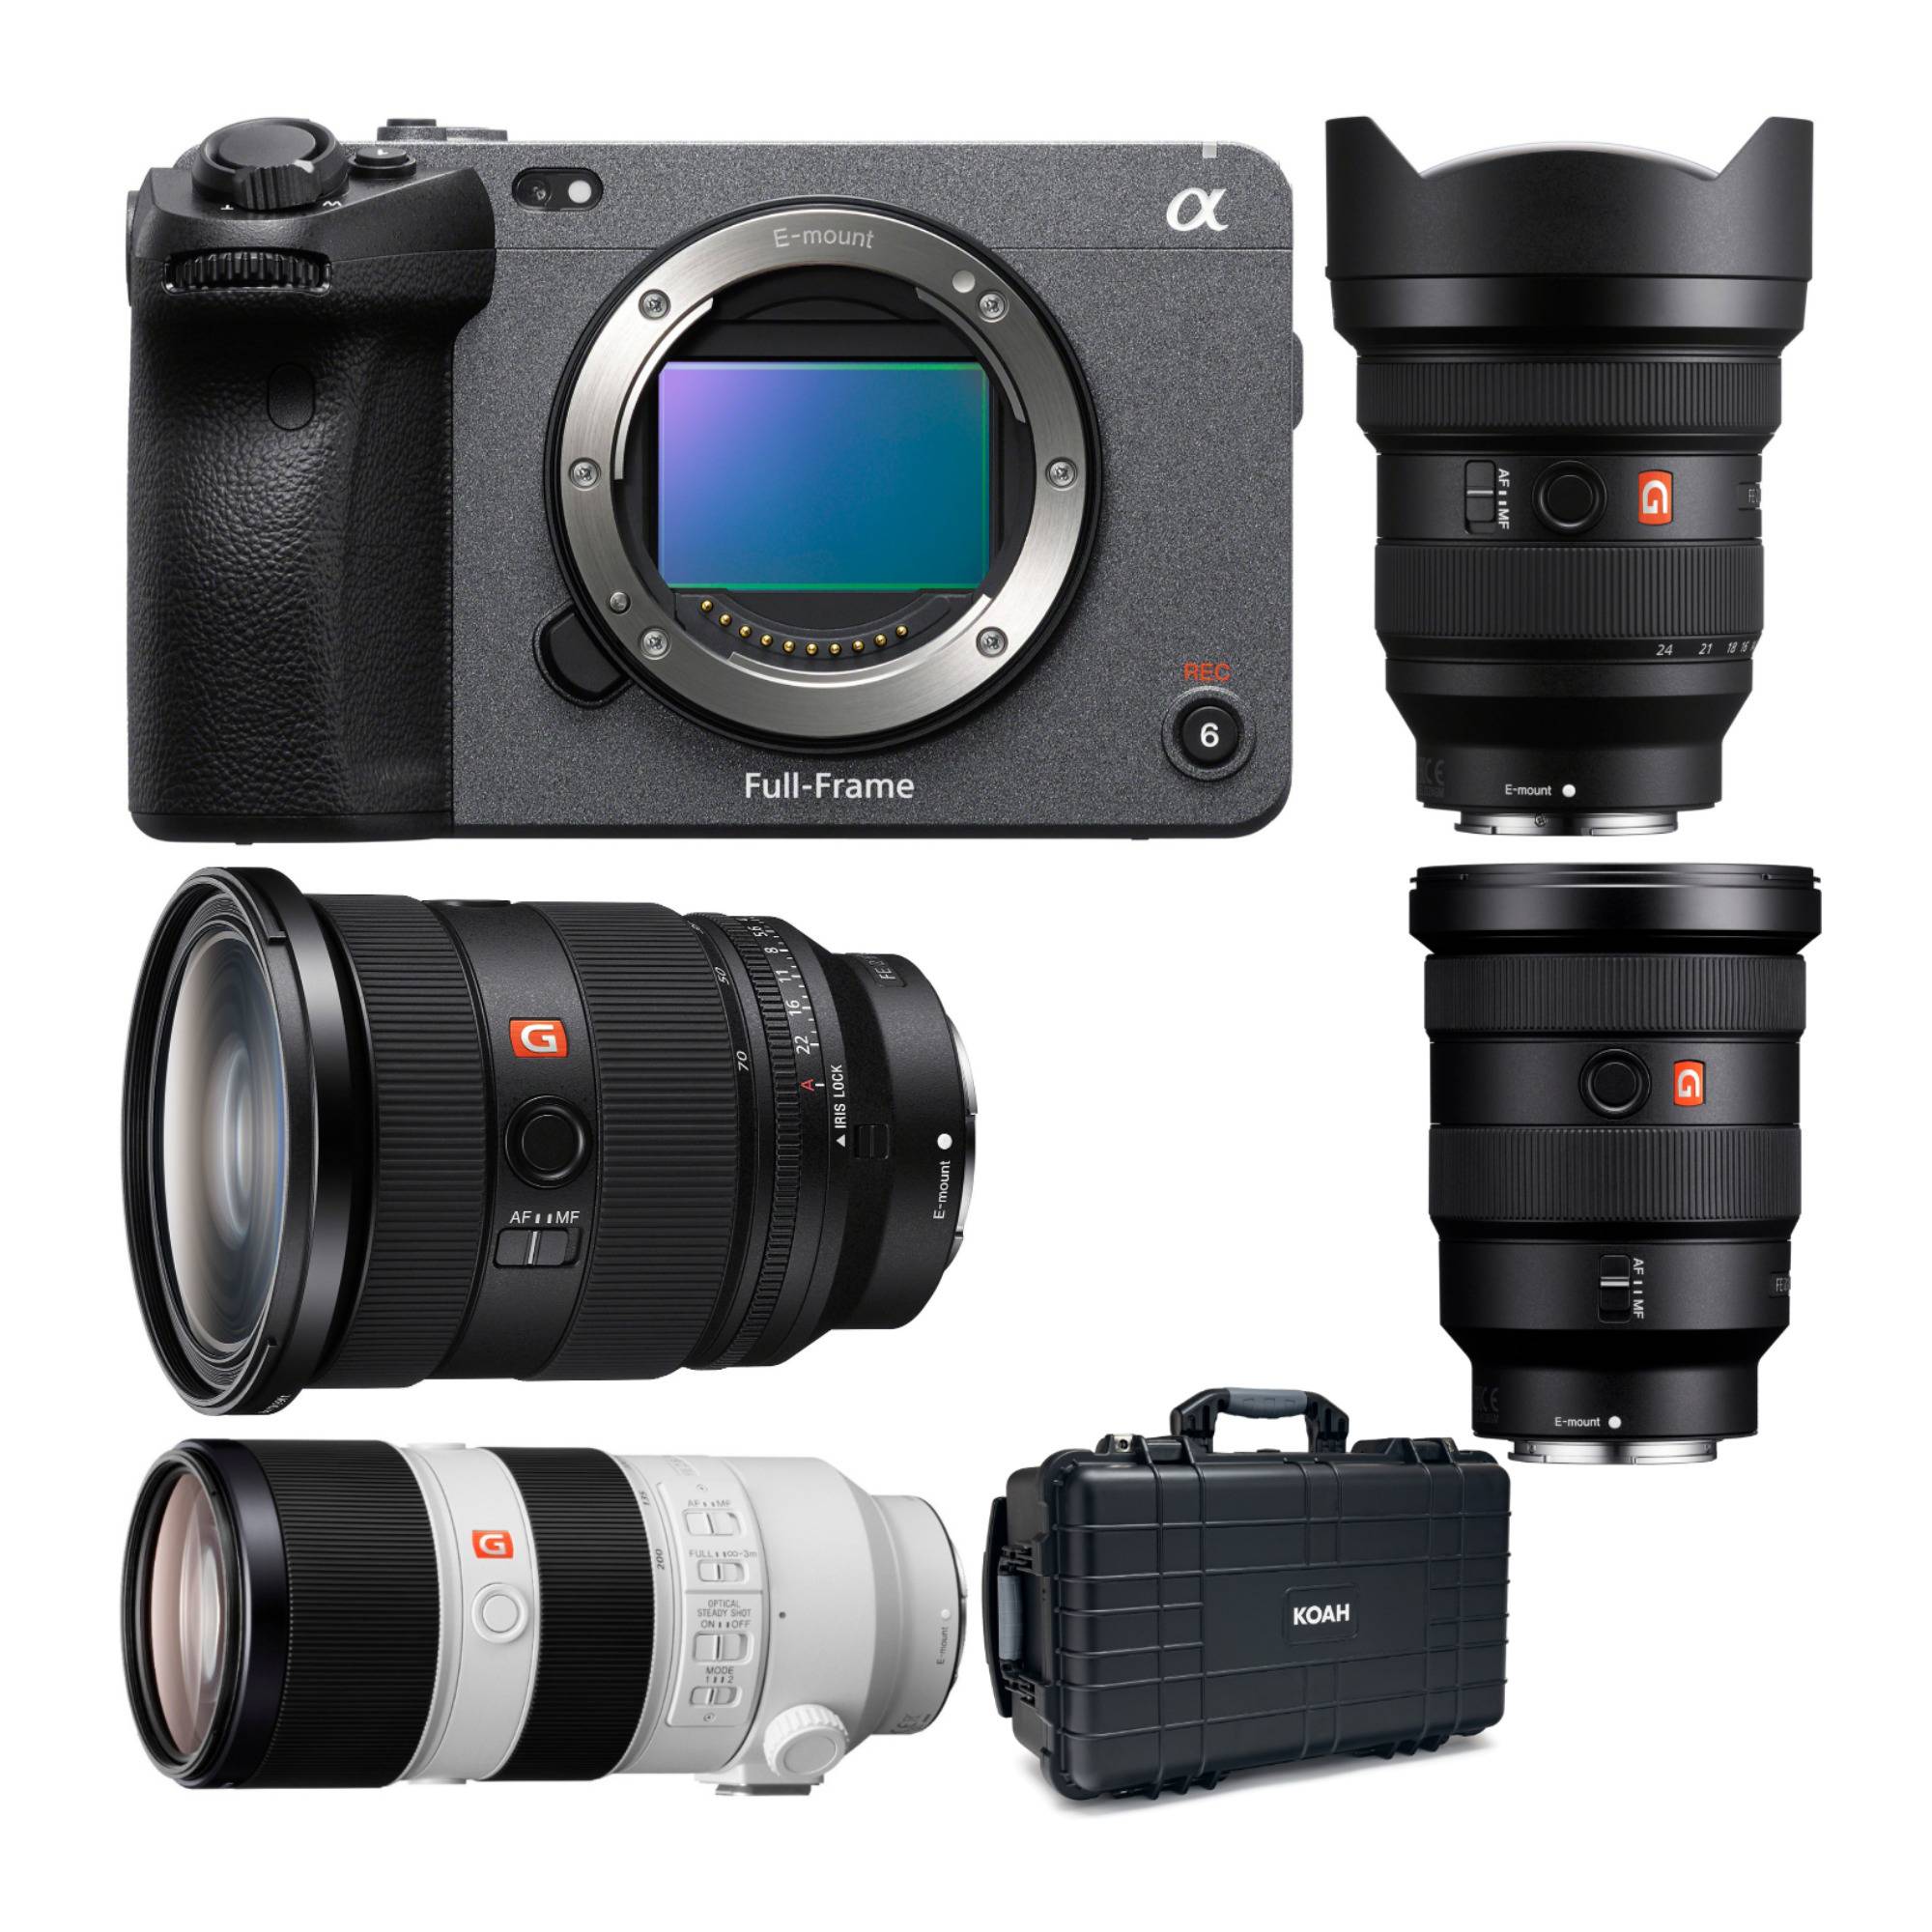 Sony Alpha FX3 Cinema Line Full-frame Camera with 24-70mm f/2.8 Zoom Lens and Wide-Angle Lens Bundle